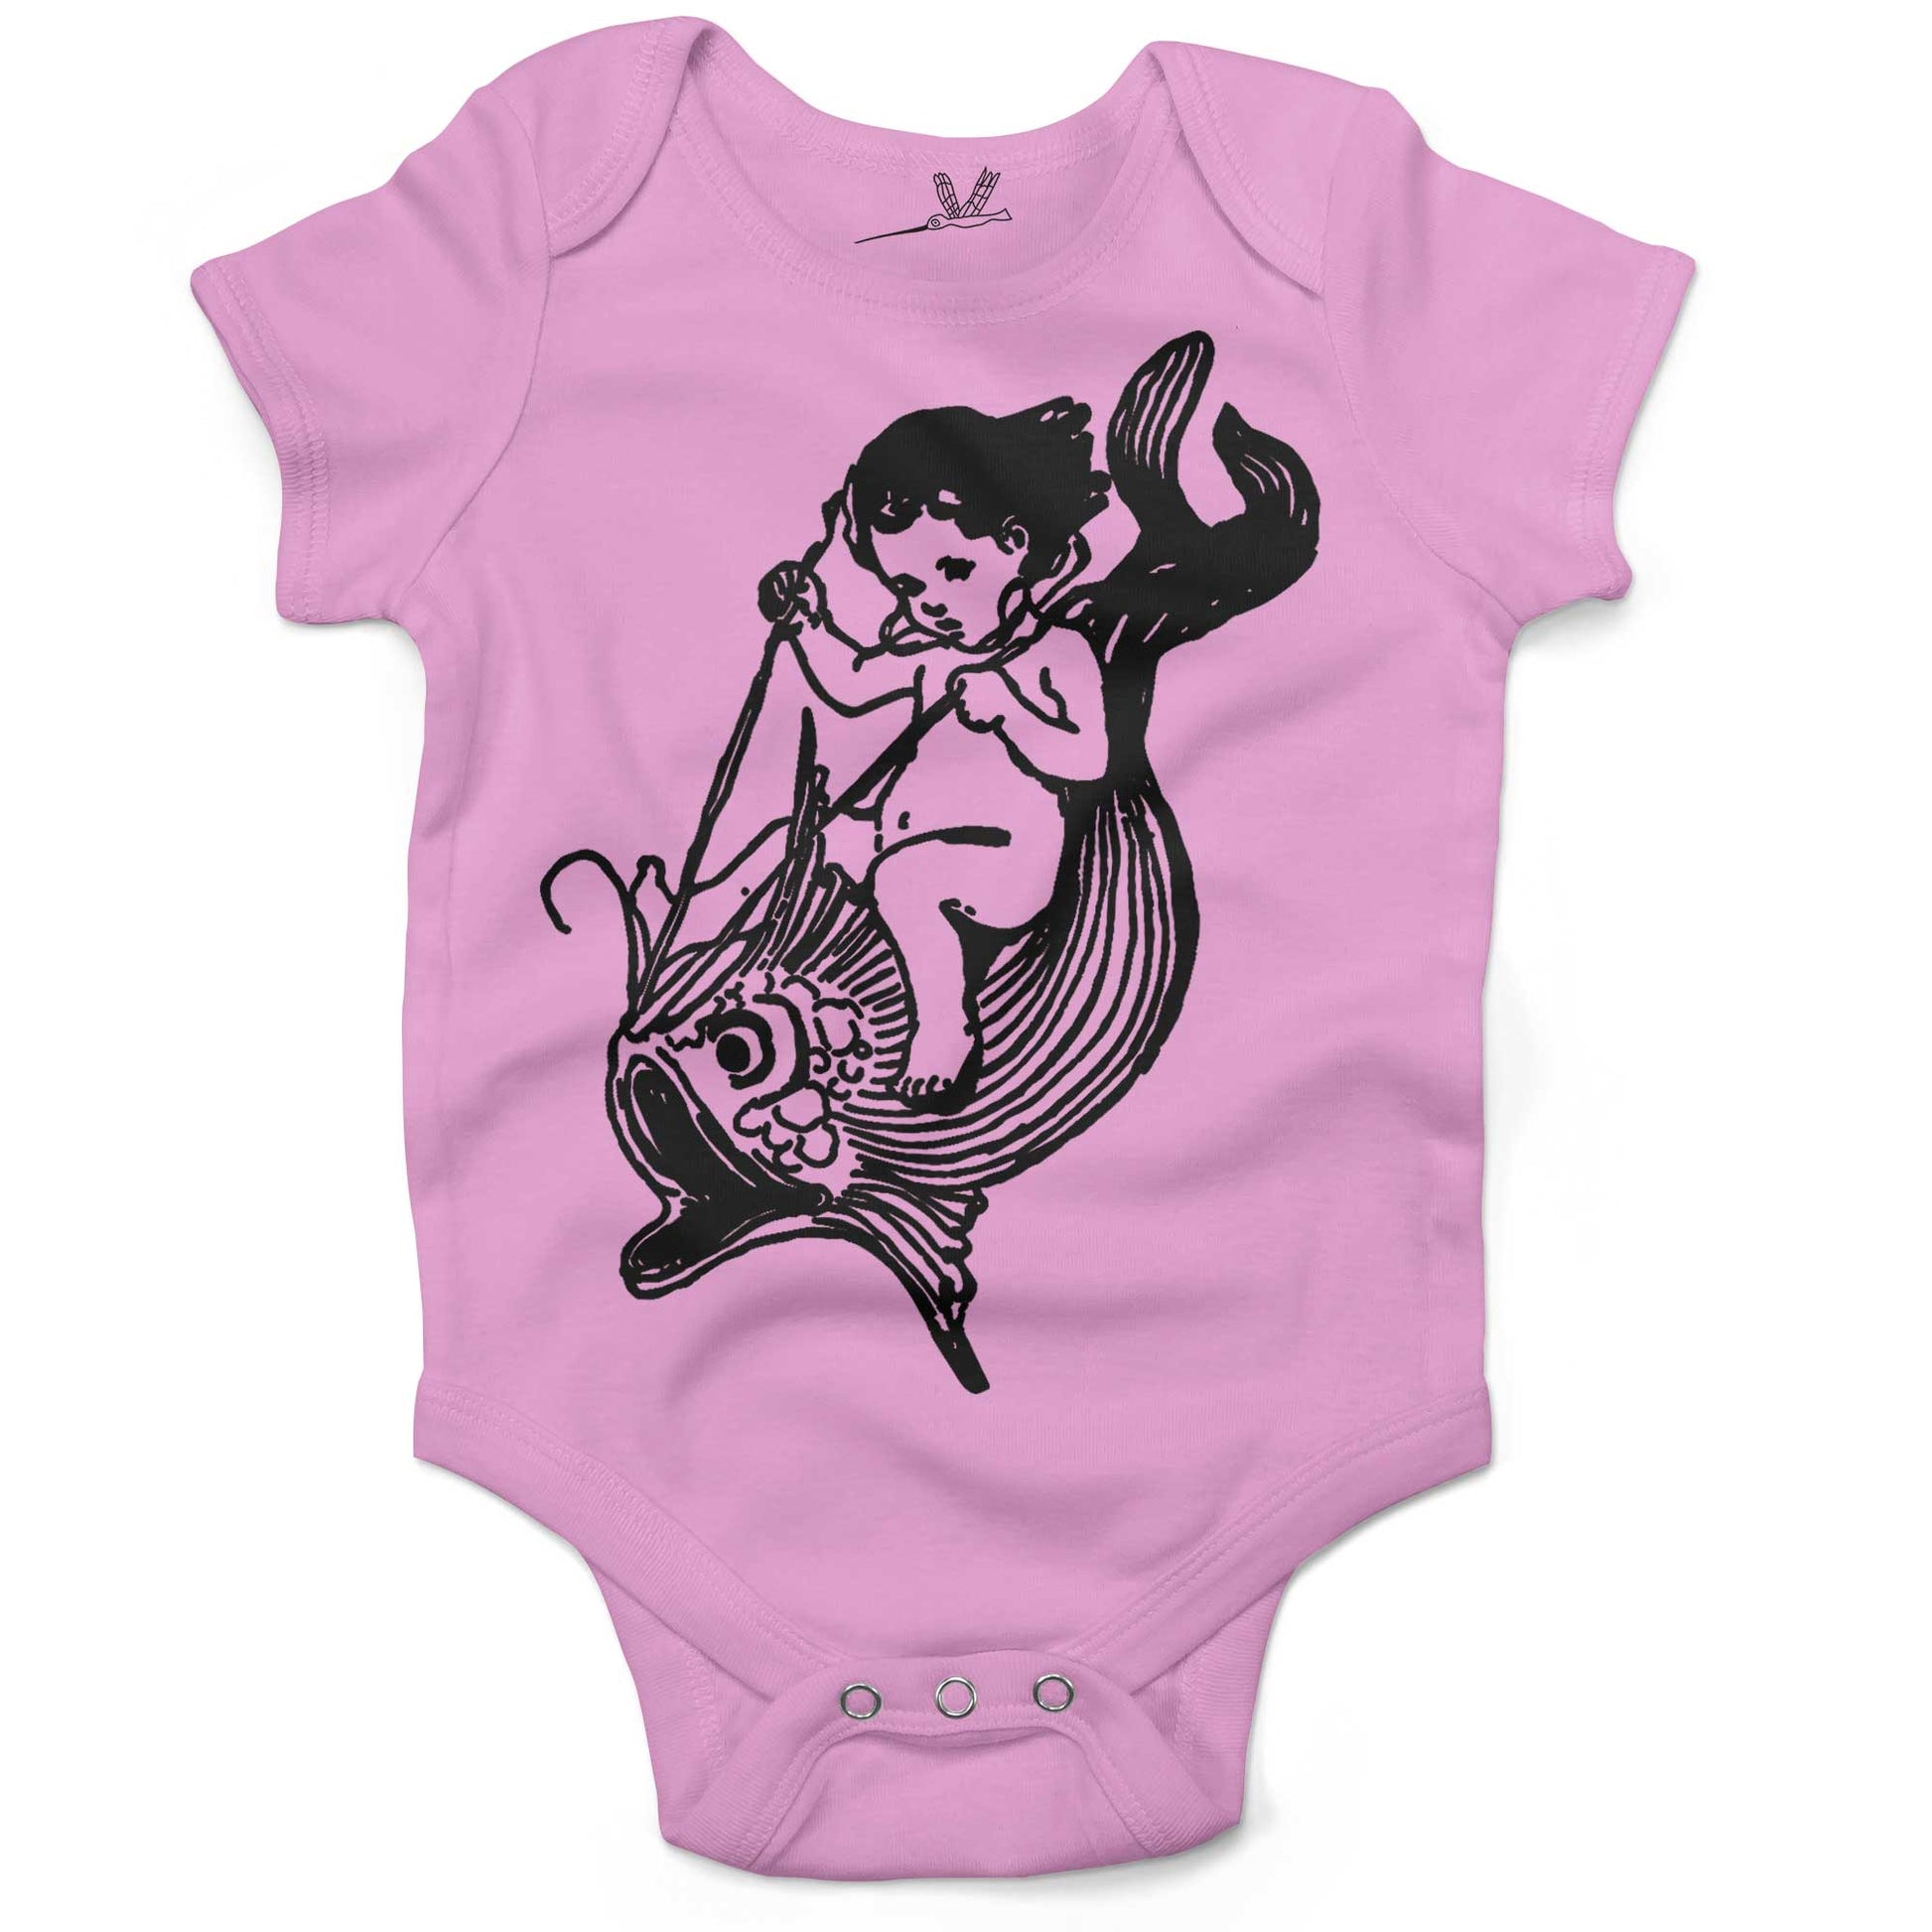 Water Baby Riding A Giant Fish Infant Bodysuit or Raglan Tee